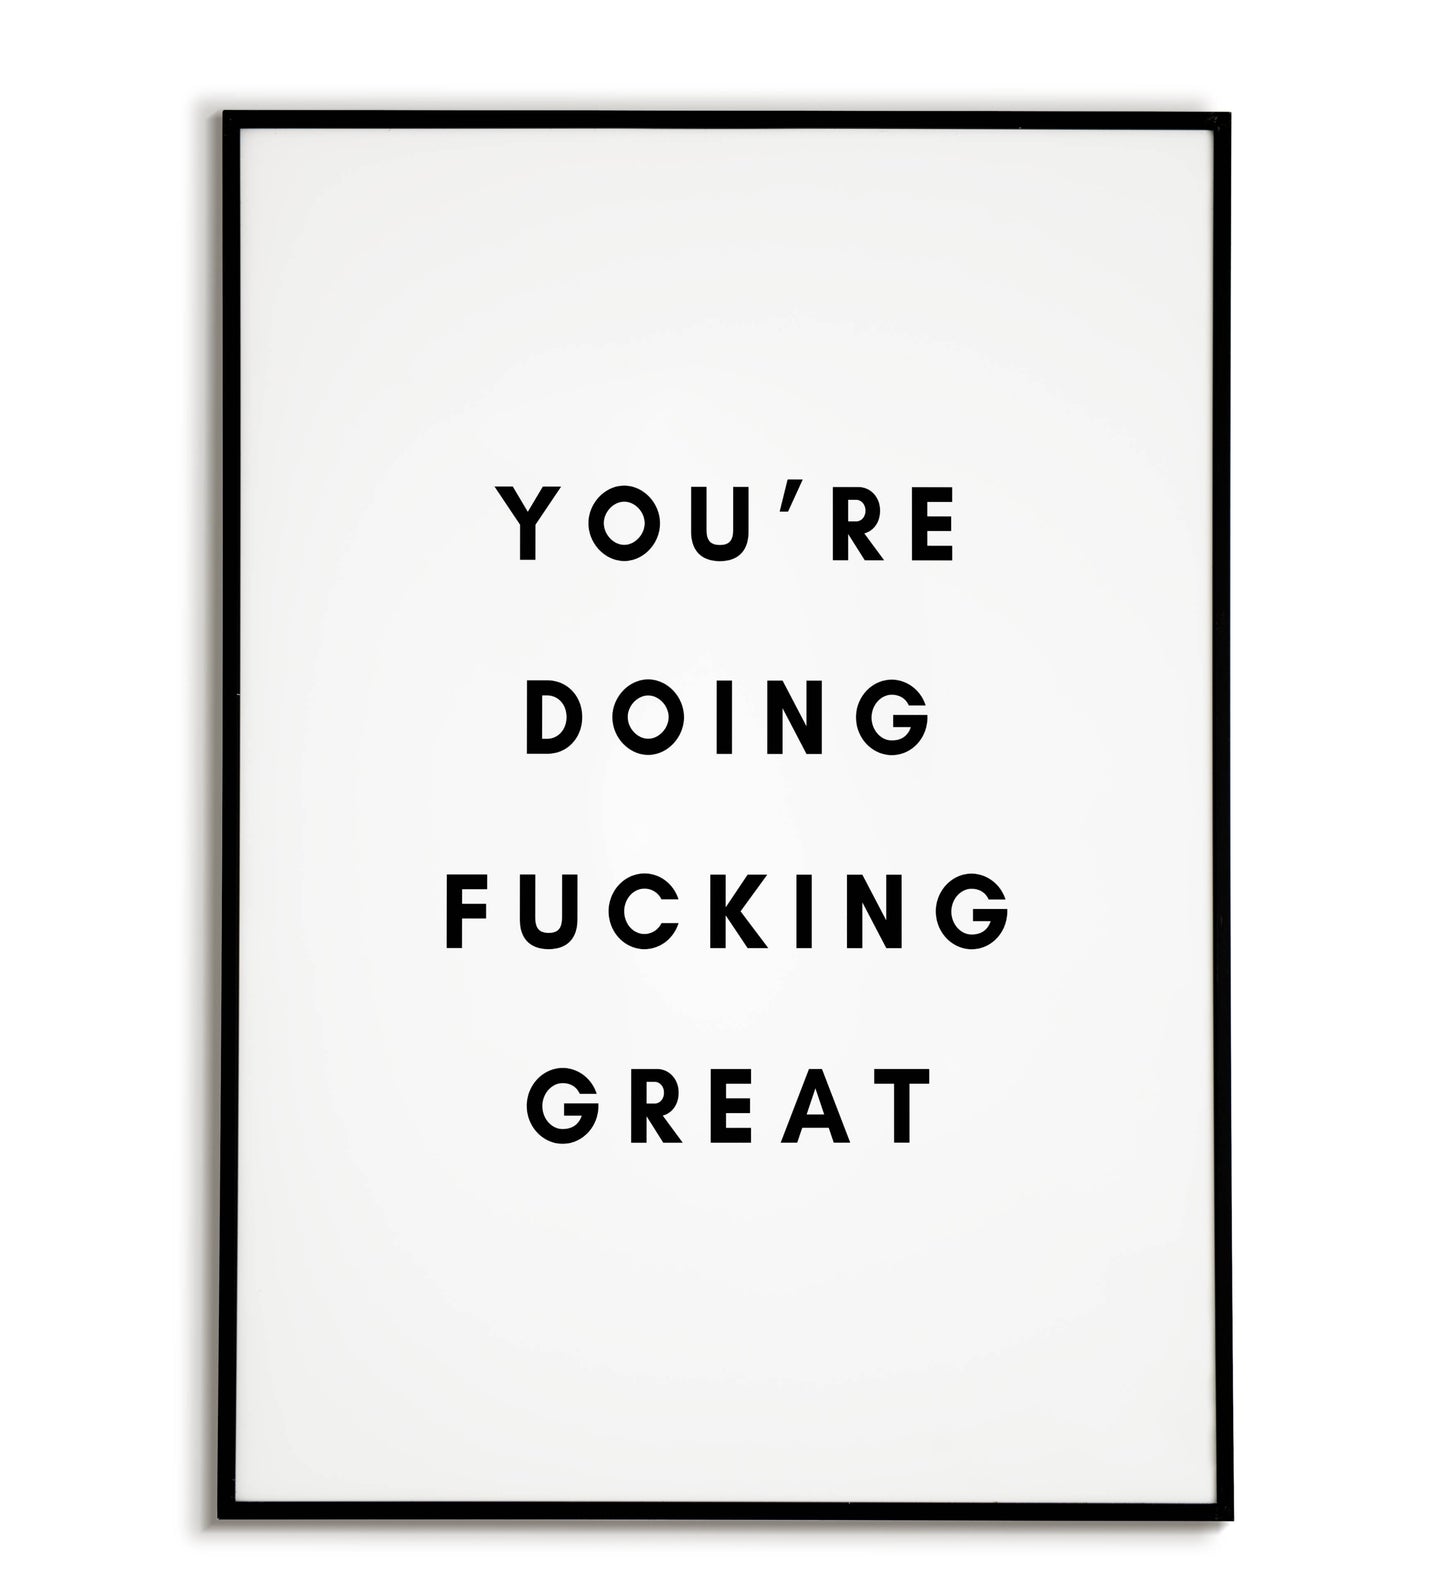 You're doing fucking great" typographic motivational poster with strong language